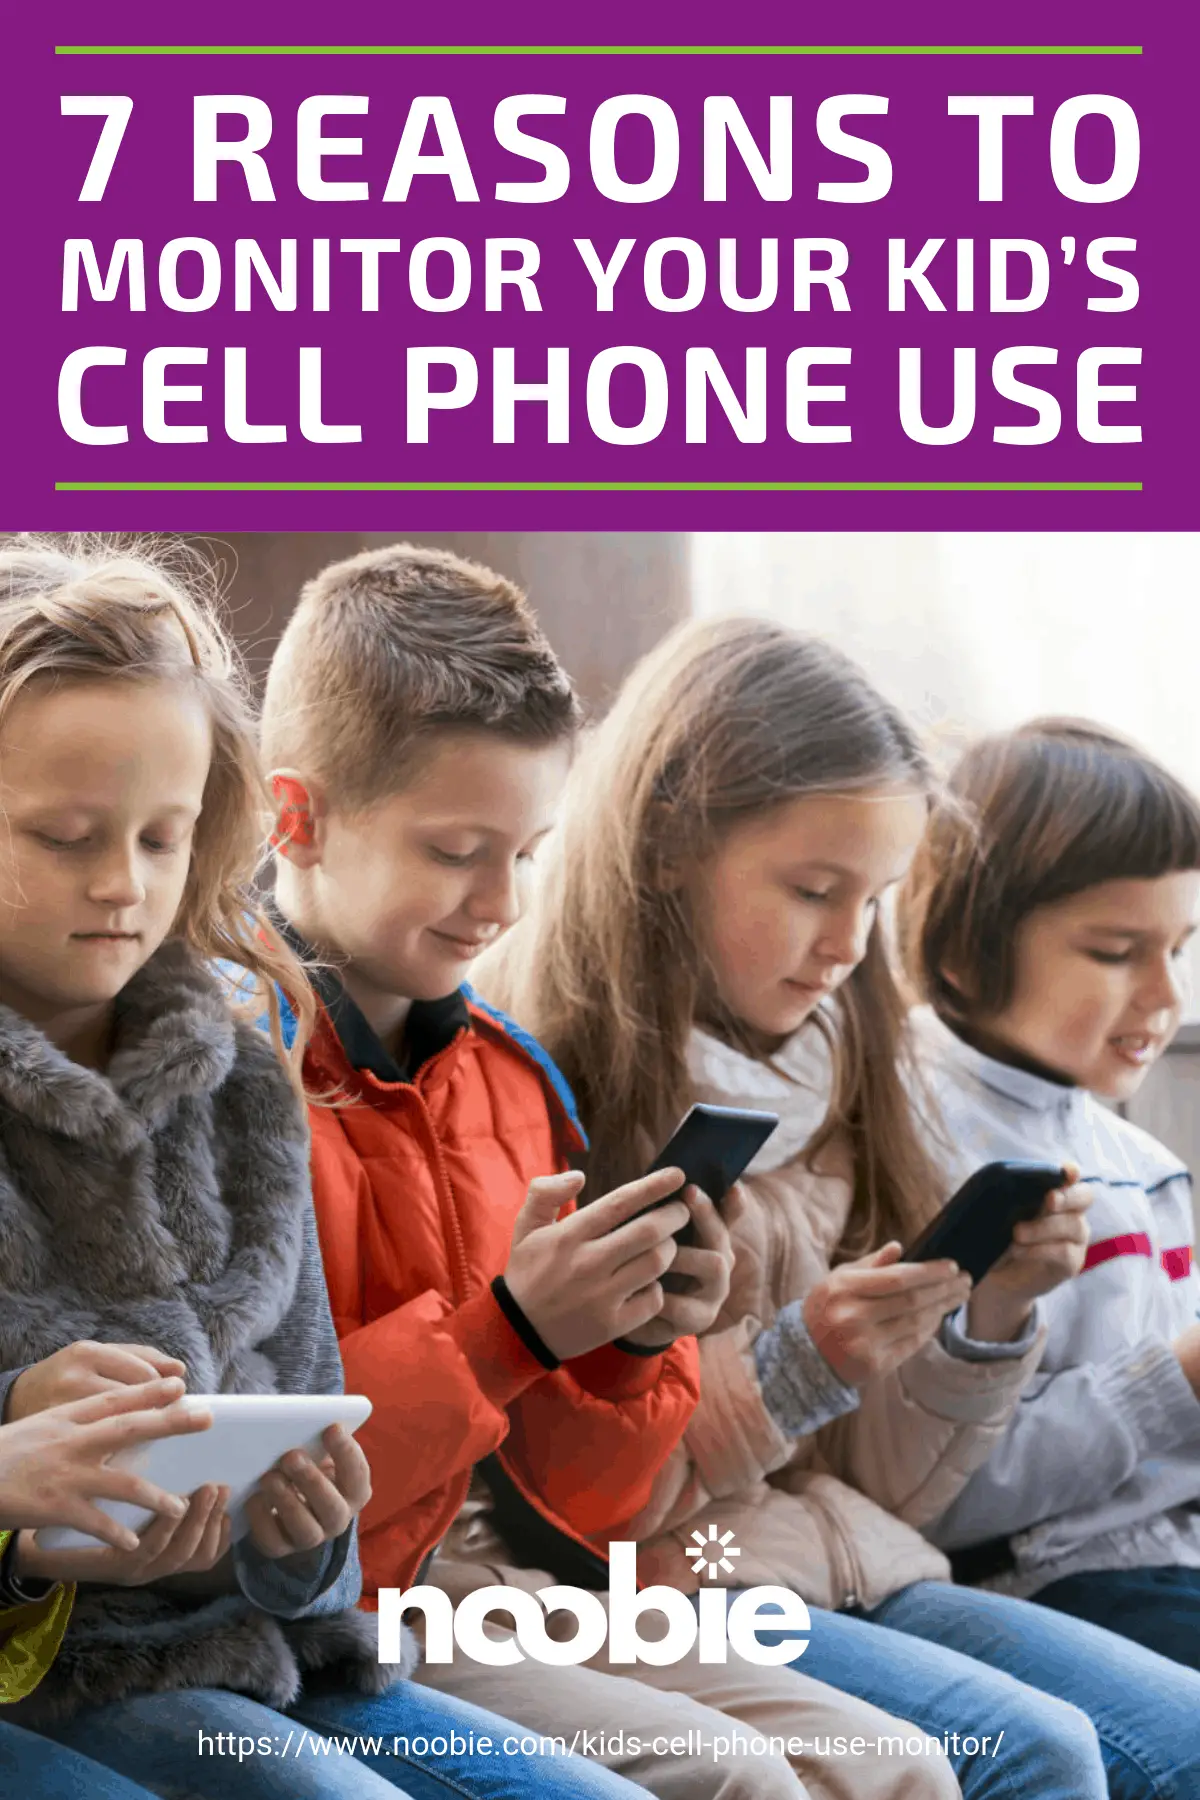 7 Reasons To Monitor Your Kid’s Cell Phone Use https://noobie.com/kids-cell-phone-use-monitor/